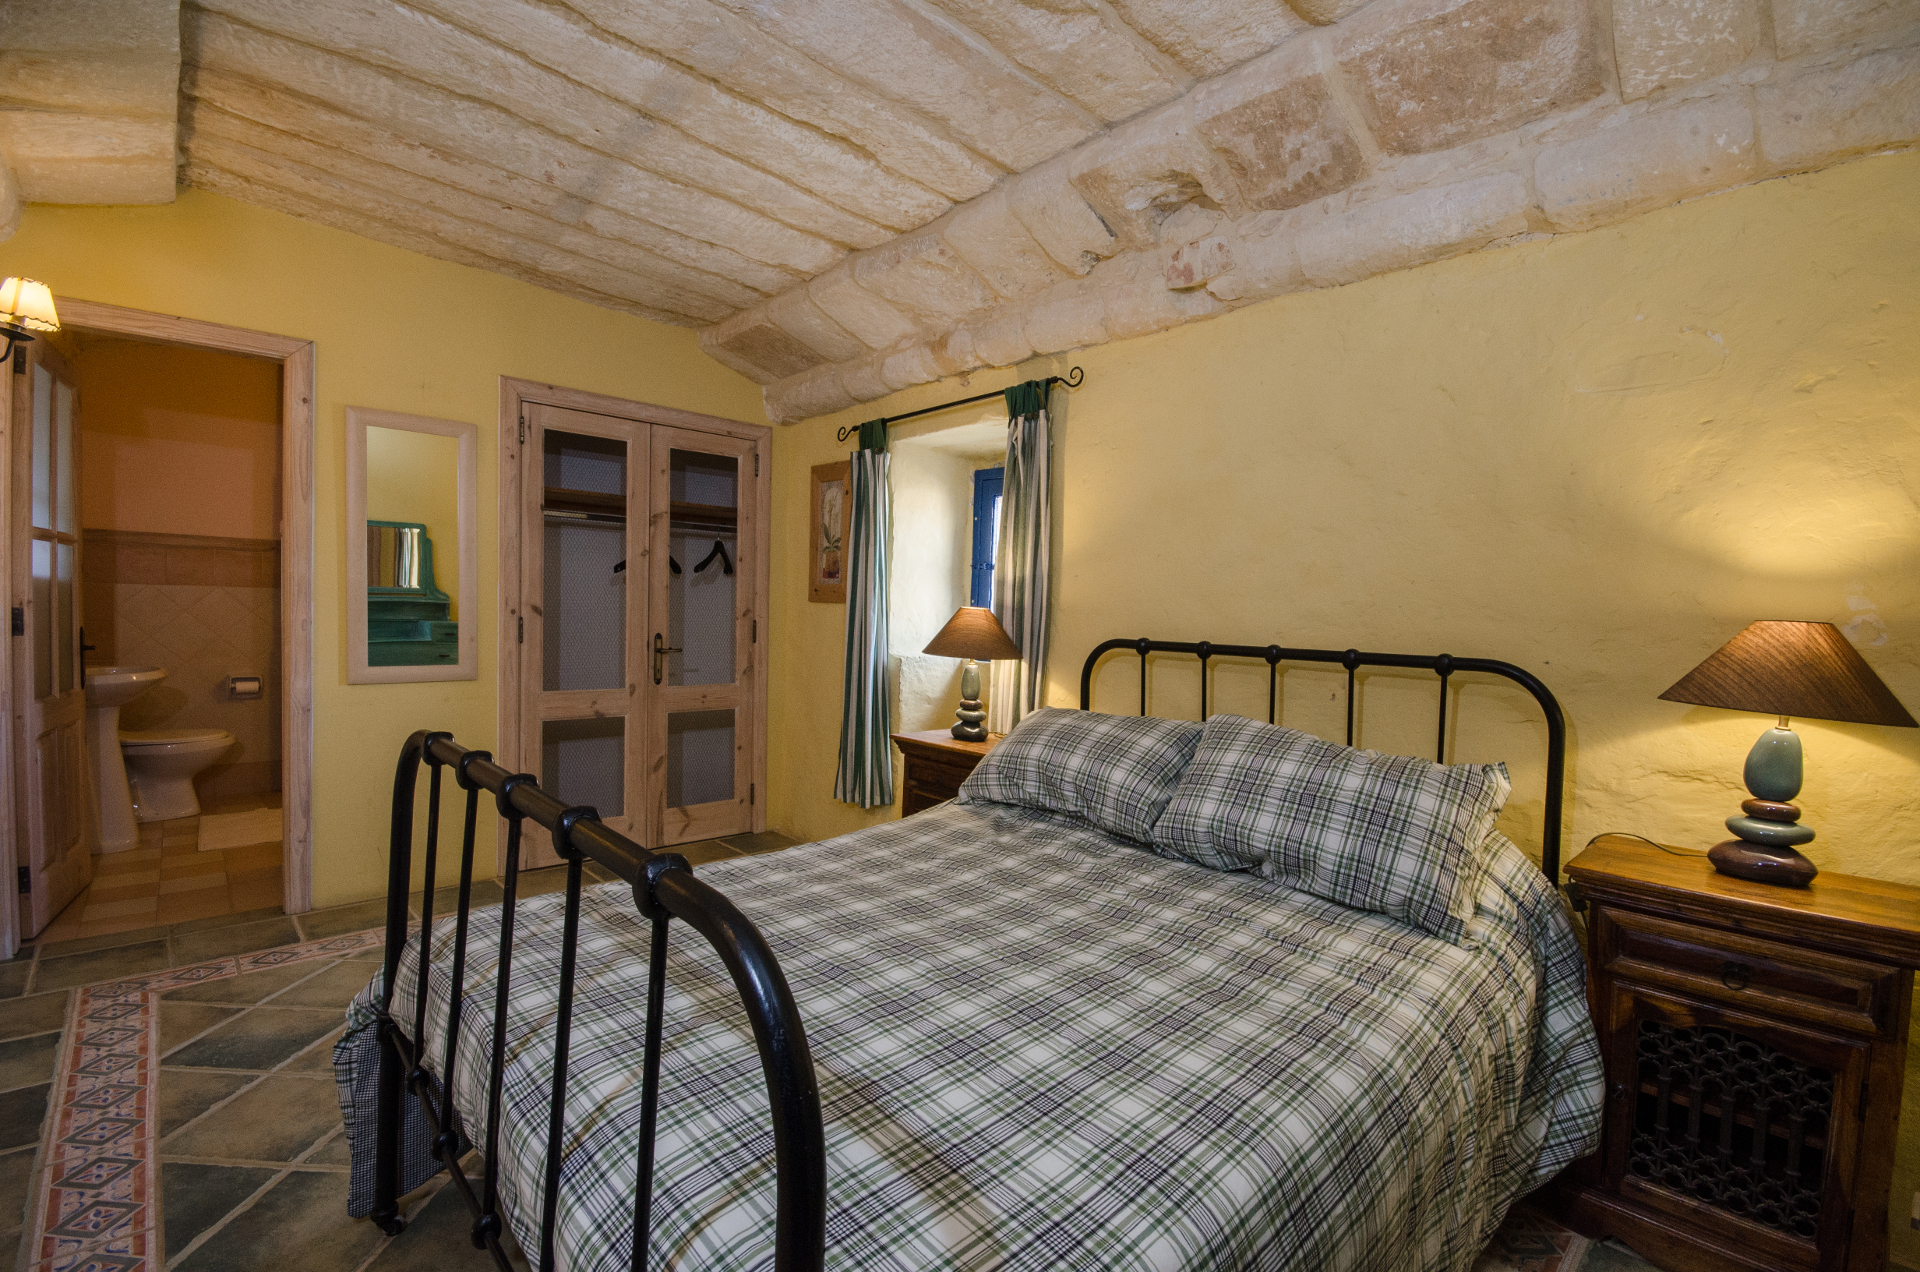 Bed-and-Breakfast-Malta-11